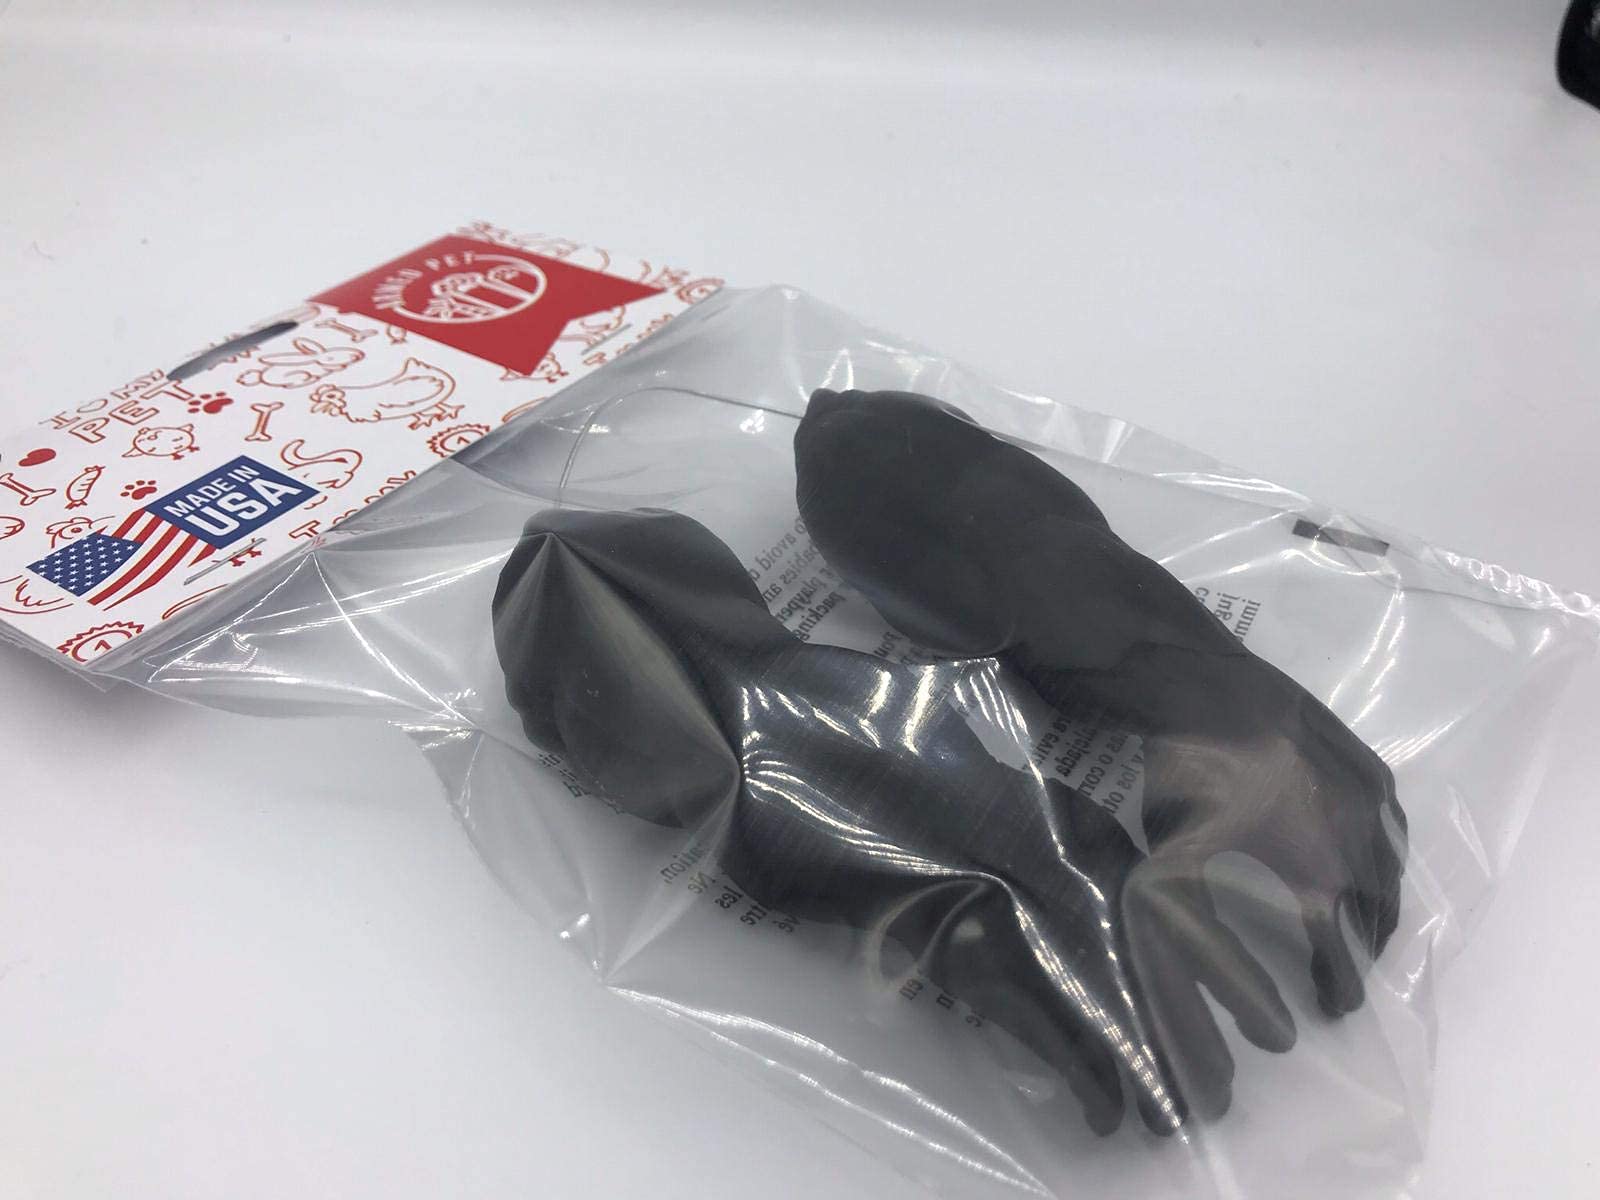 Black Strong Chicken Limited Edition Arms Gag Gift Chicken Arms for Chicken - GoodBuy.ai